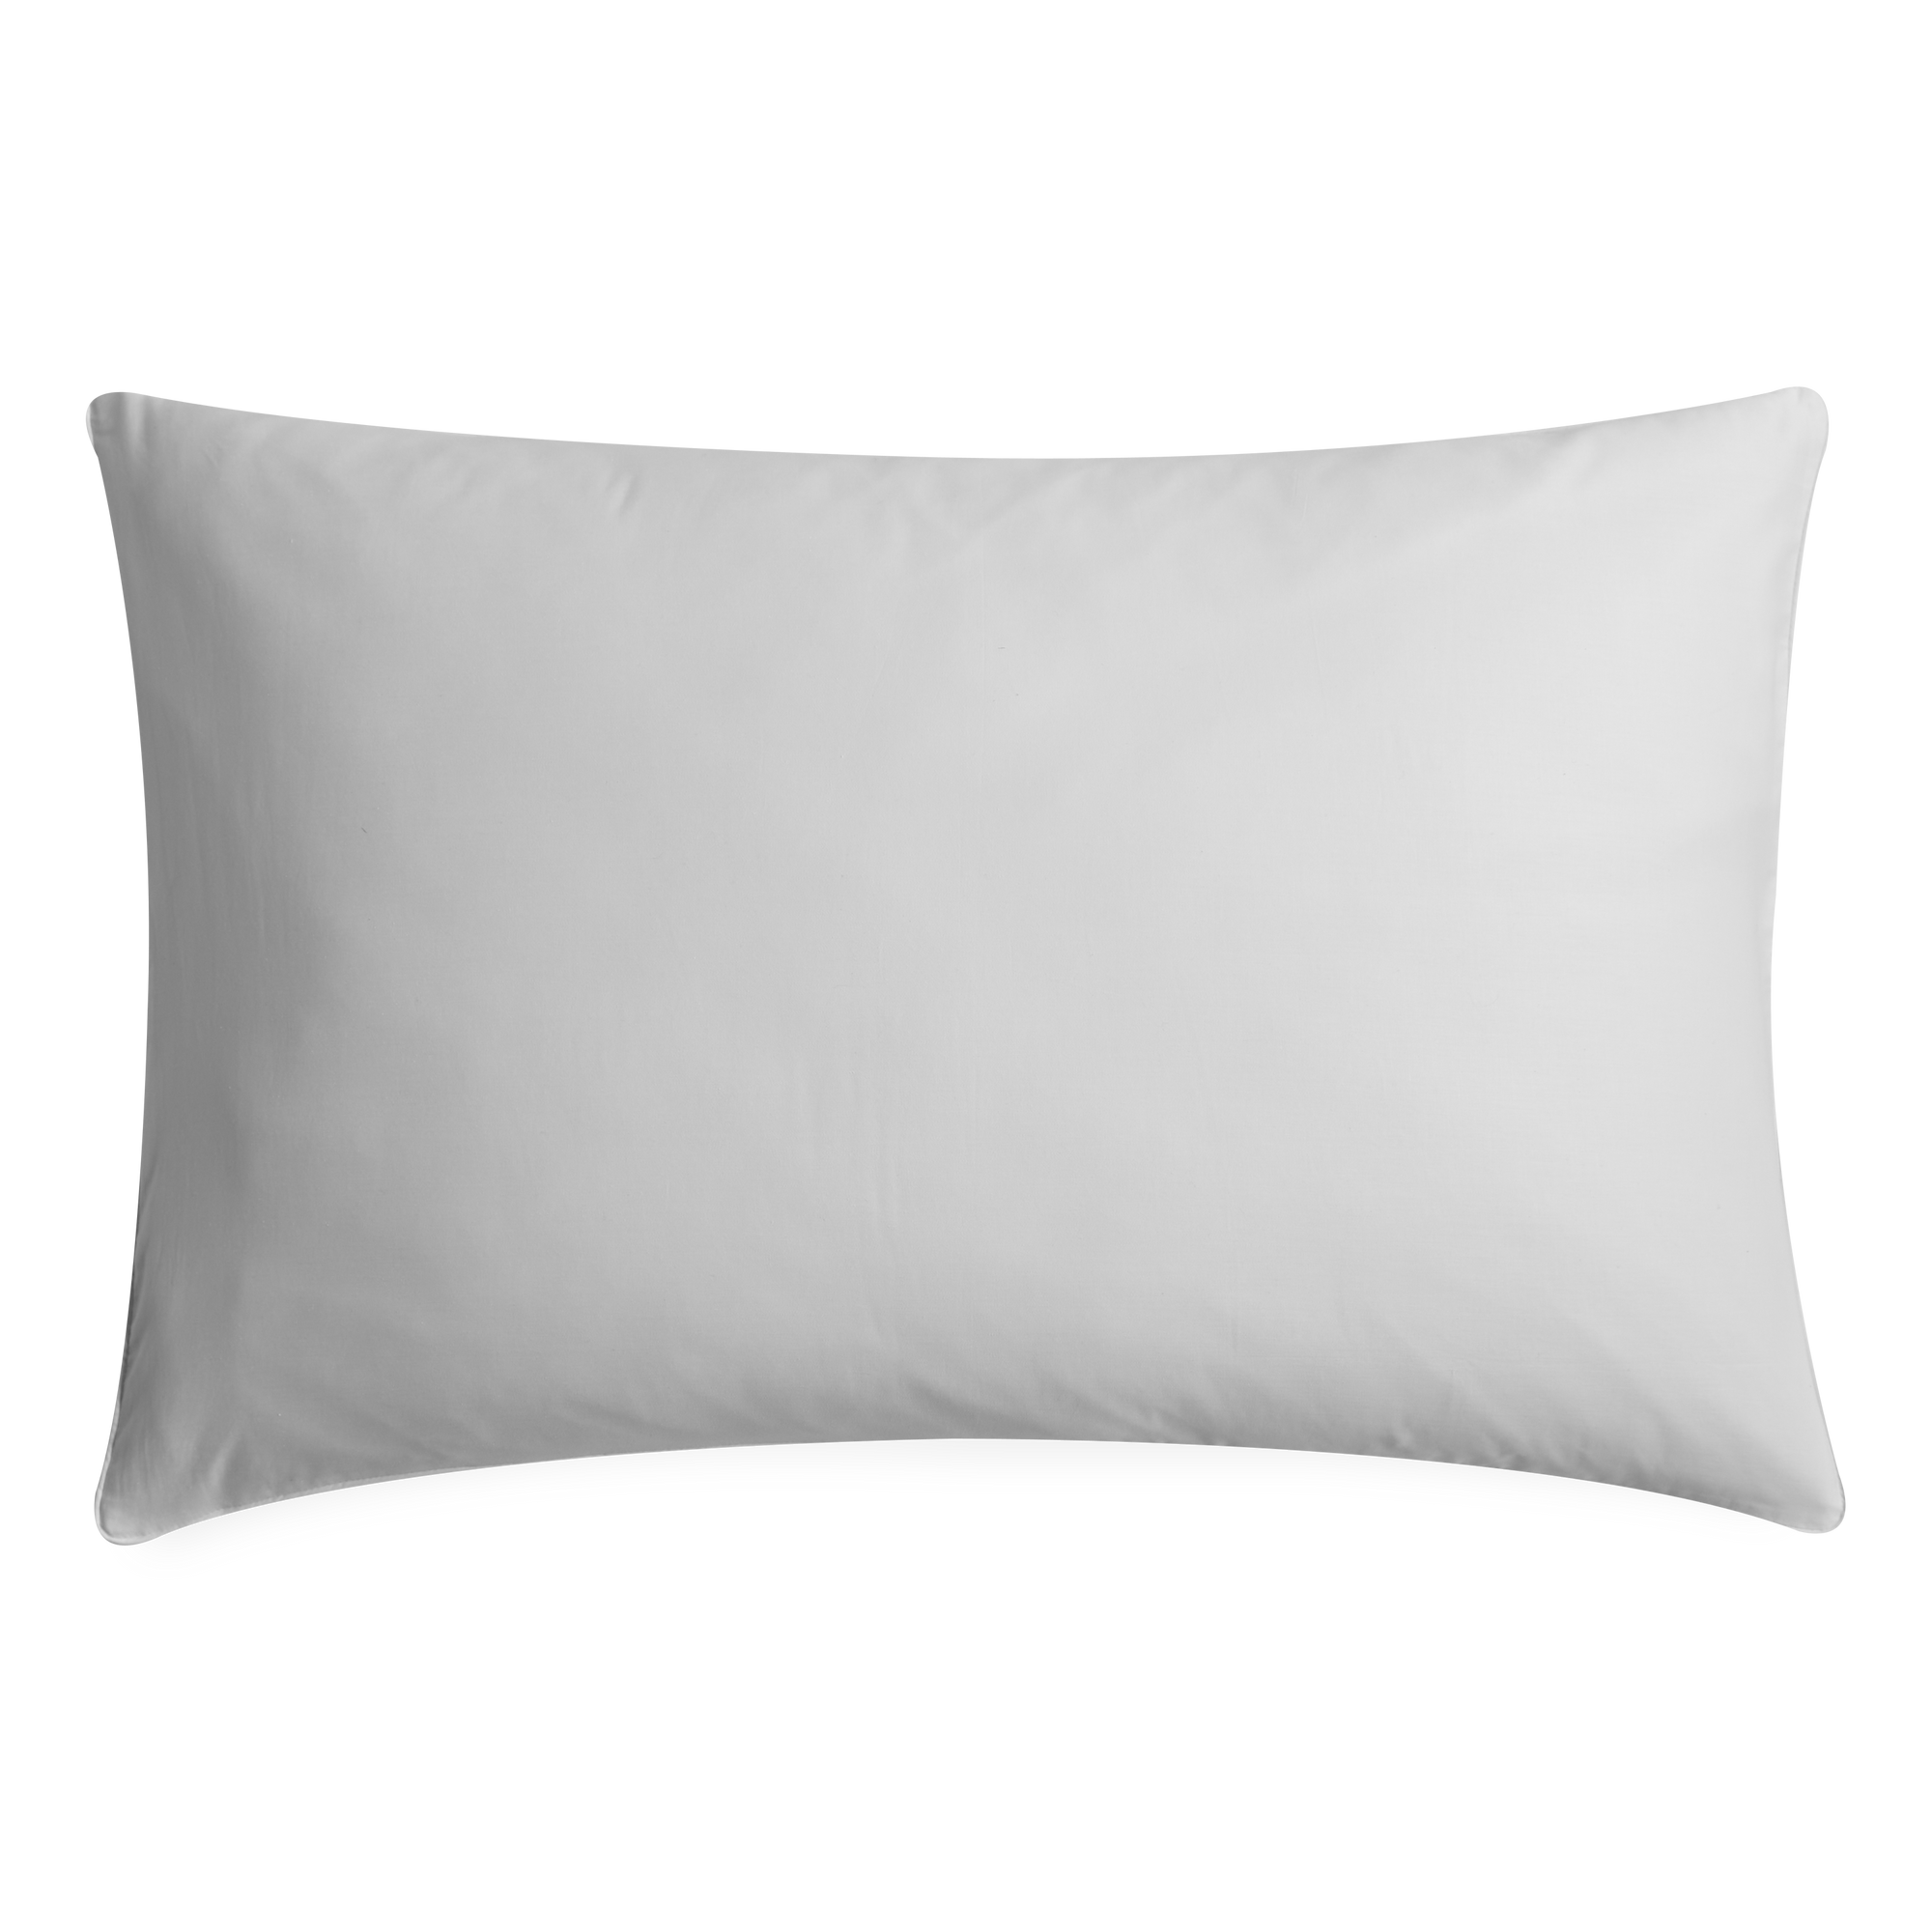 Serving as an additional layer between your pillow and case, our pillow protectors help elongate the life of your pillows.